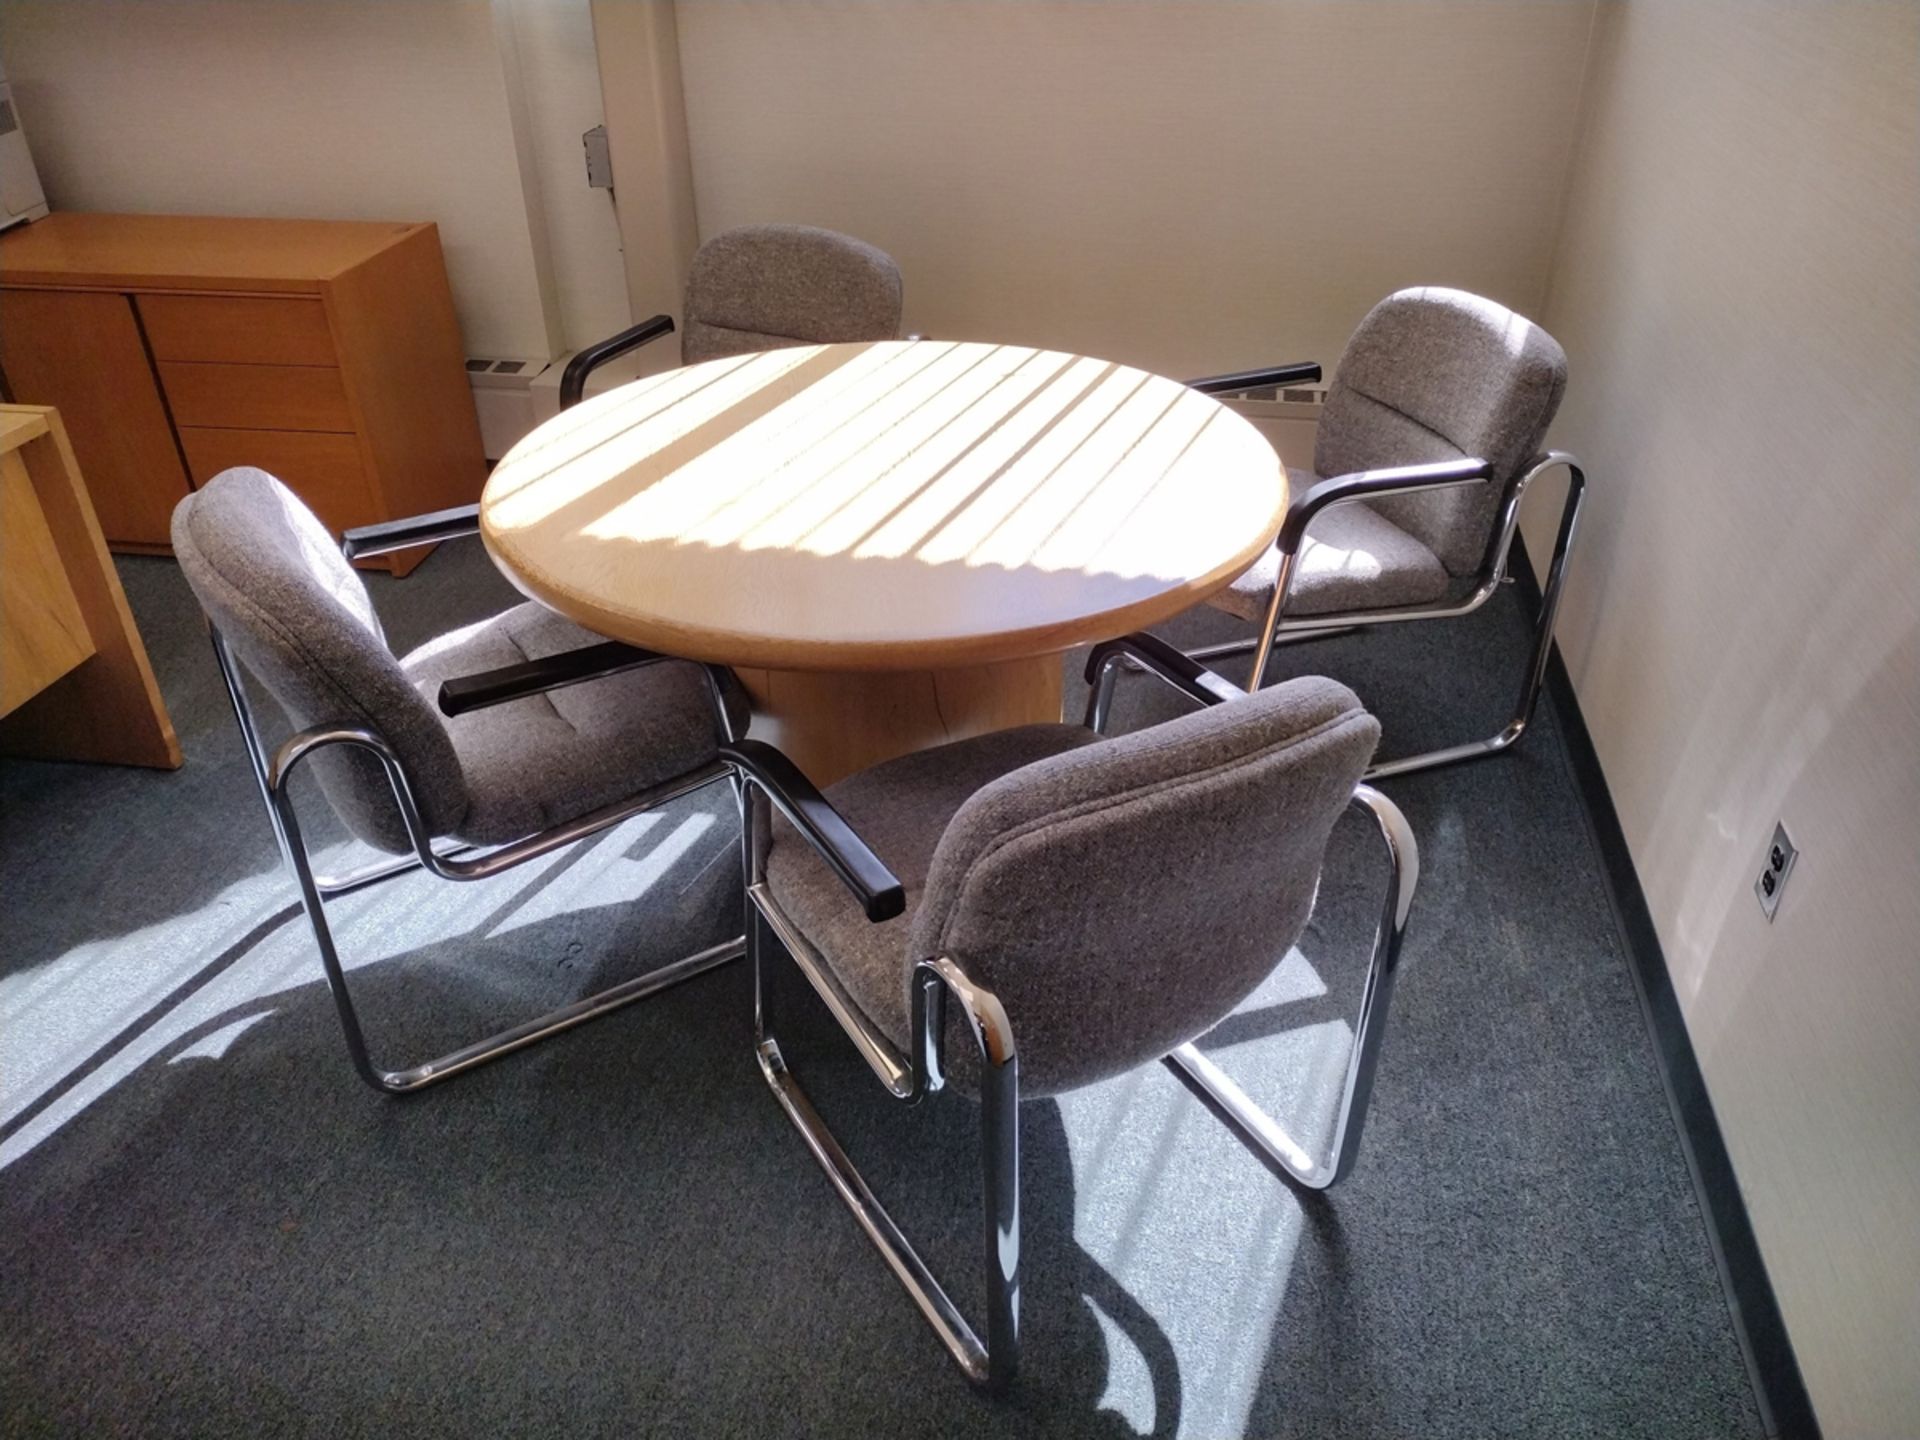 Group of Office Furniture Throughout Rooms - Image 8 of 14